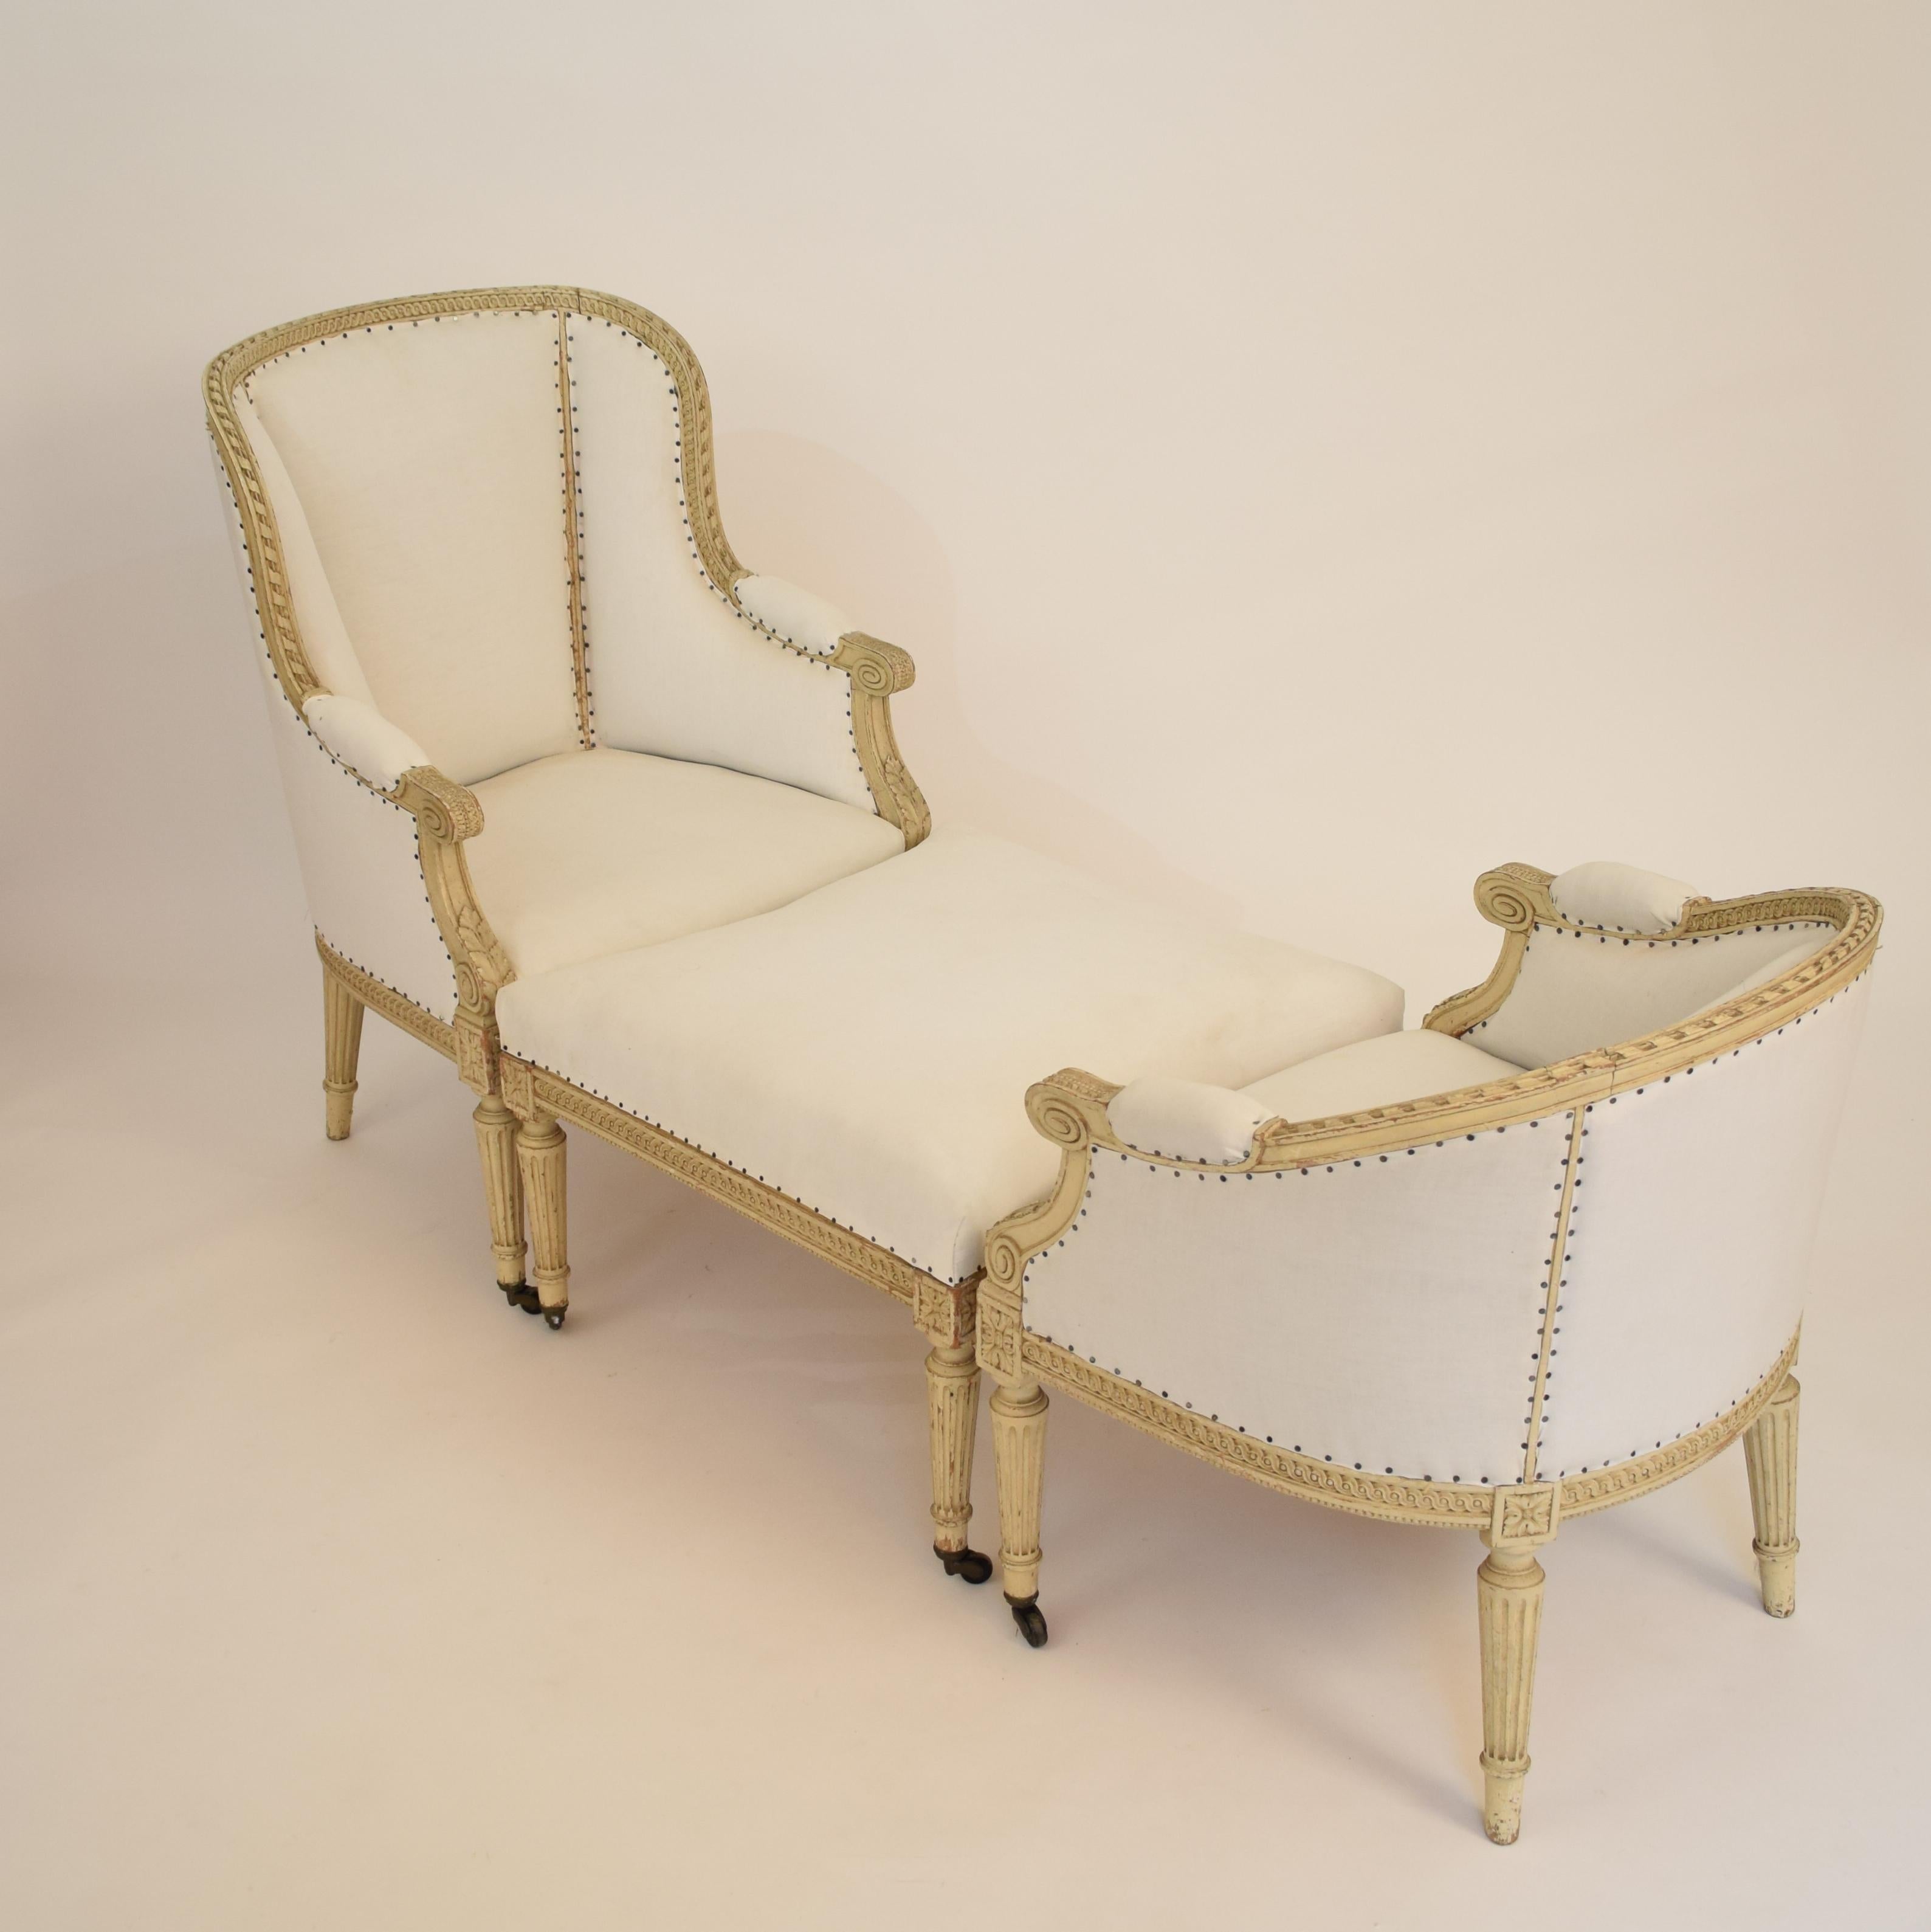 French 1850s Louis XVI Style Duchesse Brisee in Original Lacquer and Re-Upholstered